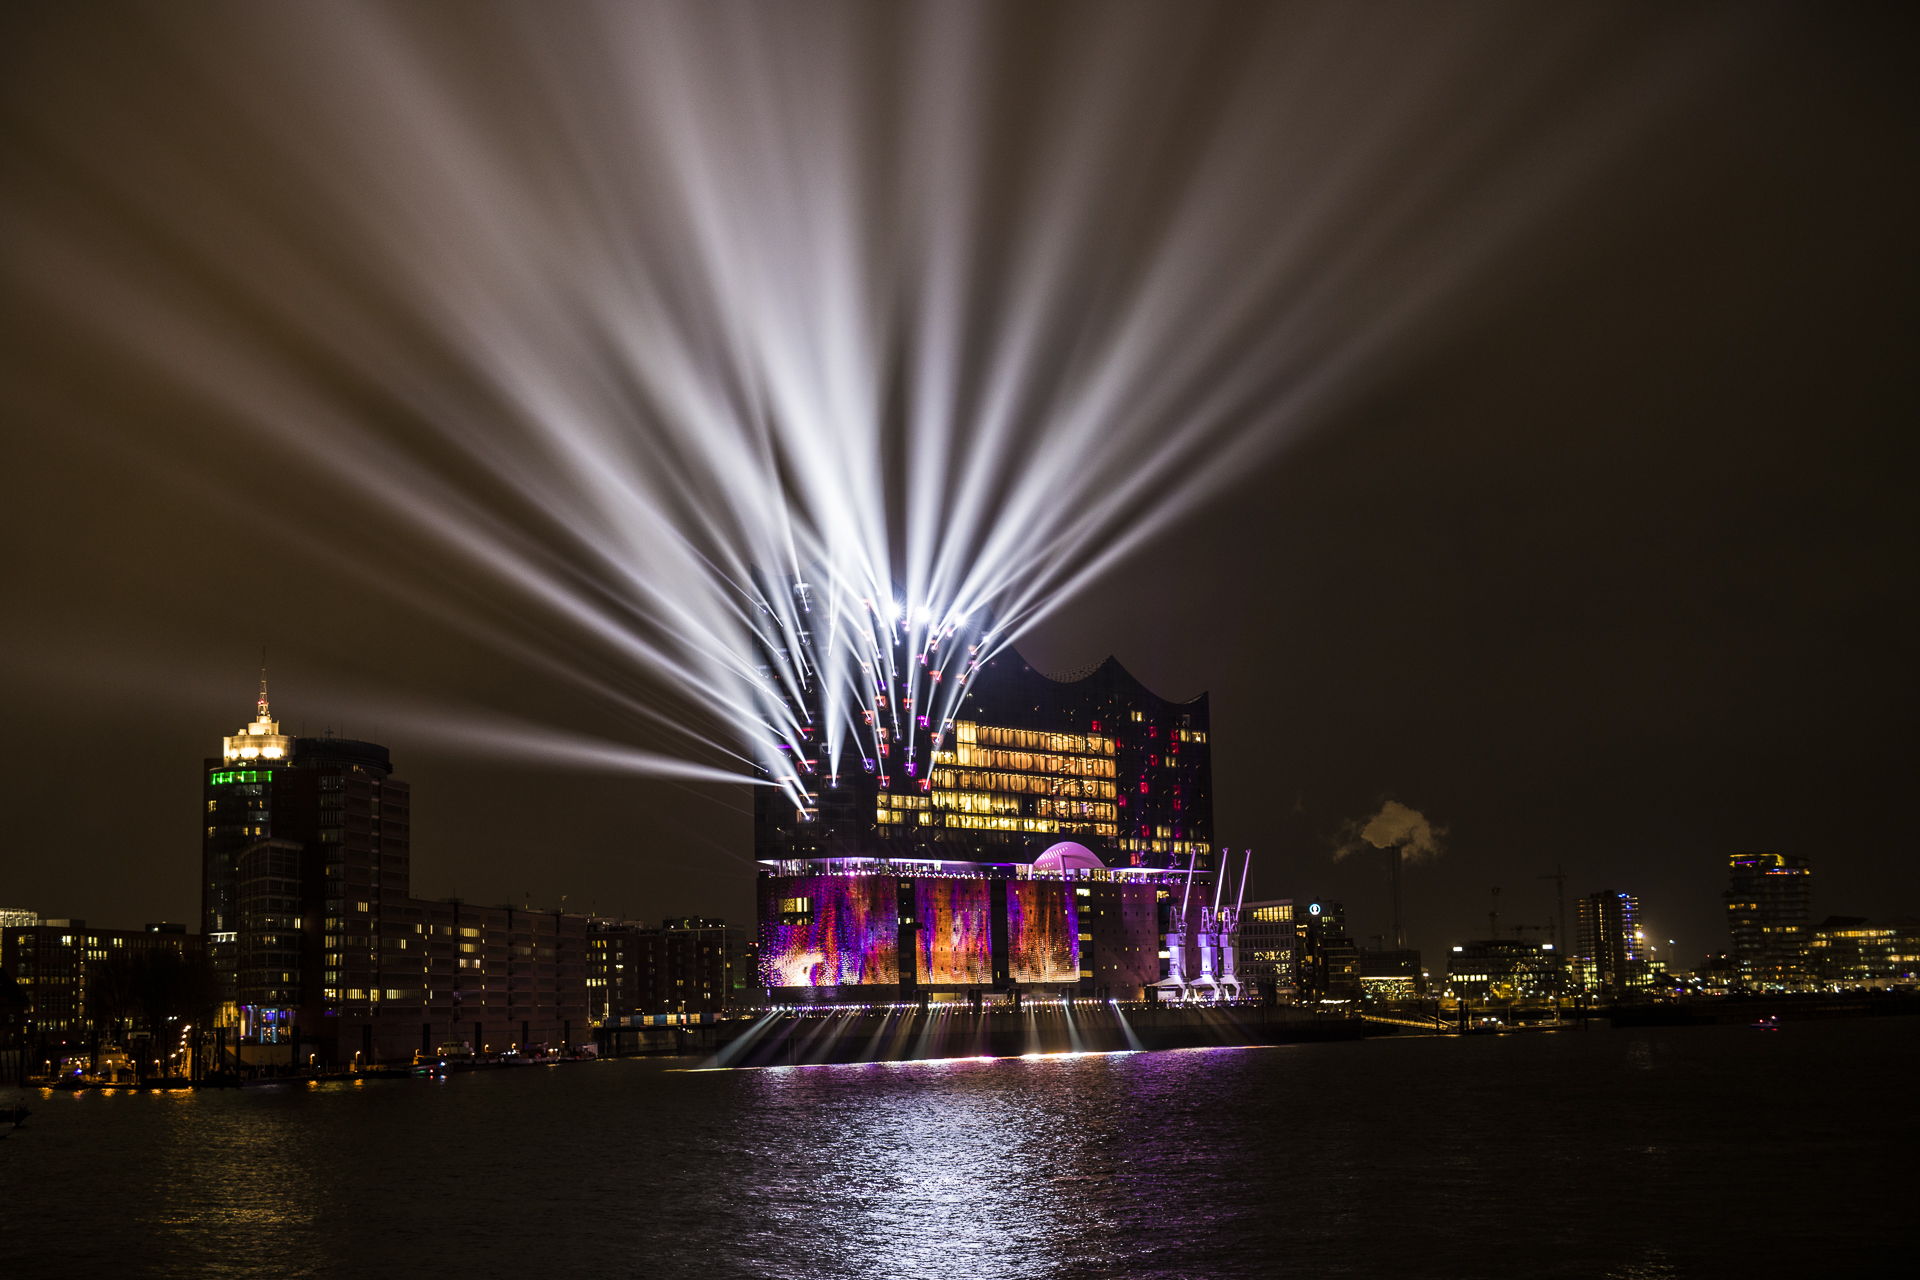 The Elbphilharmonie concert hall is located on the harbour-side in Hamburg